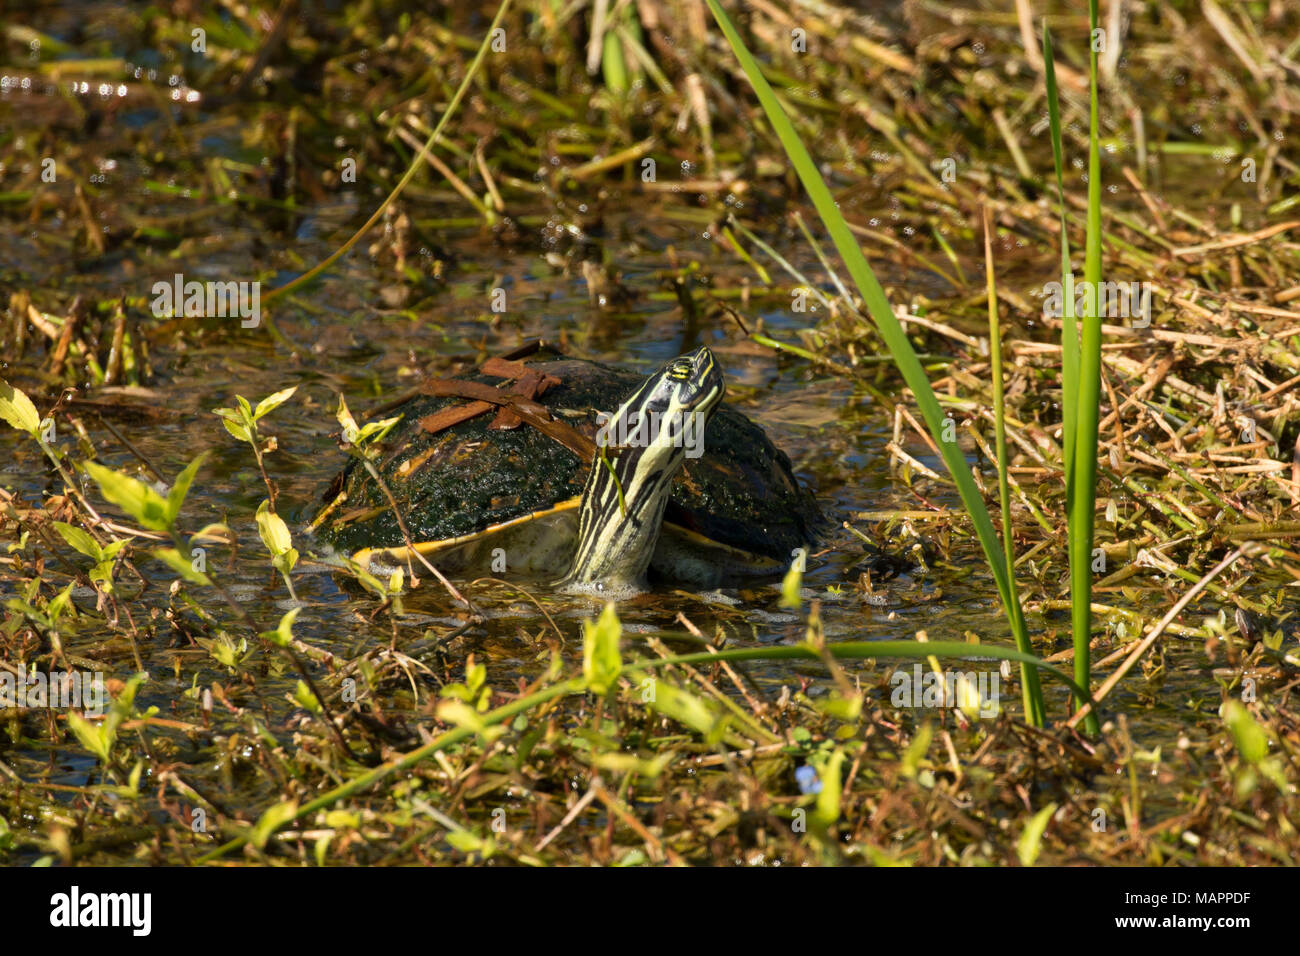 Turtle, Ritch Grissom Memorial Wetlands at Viera, Florida Stock Photo